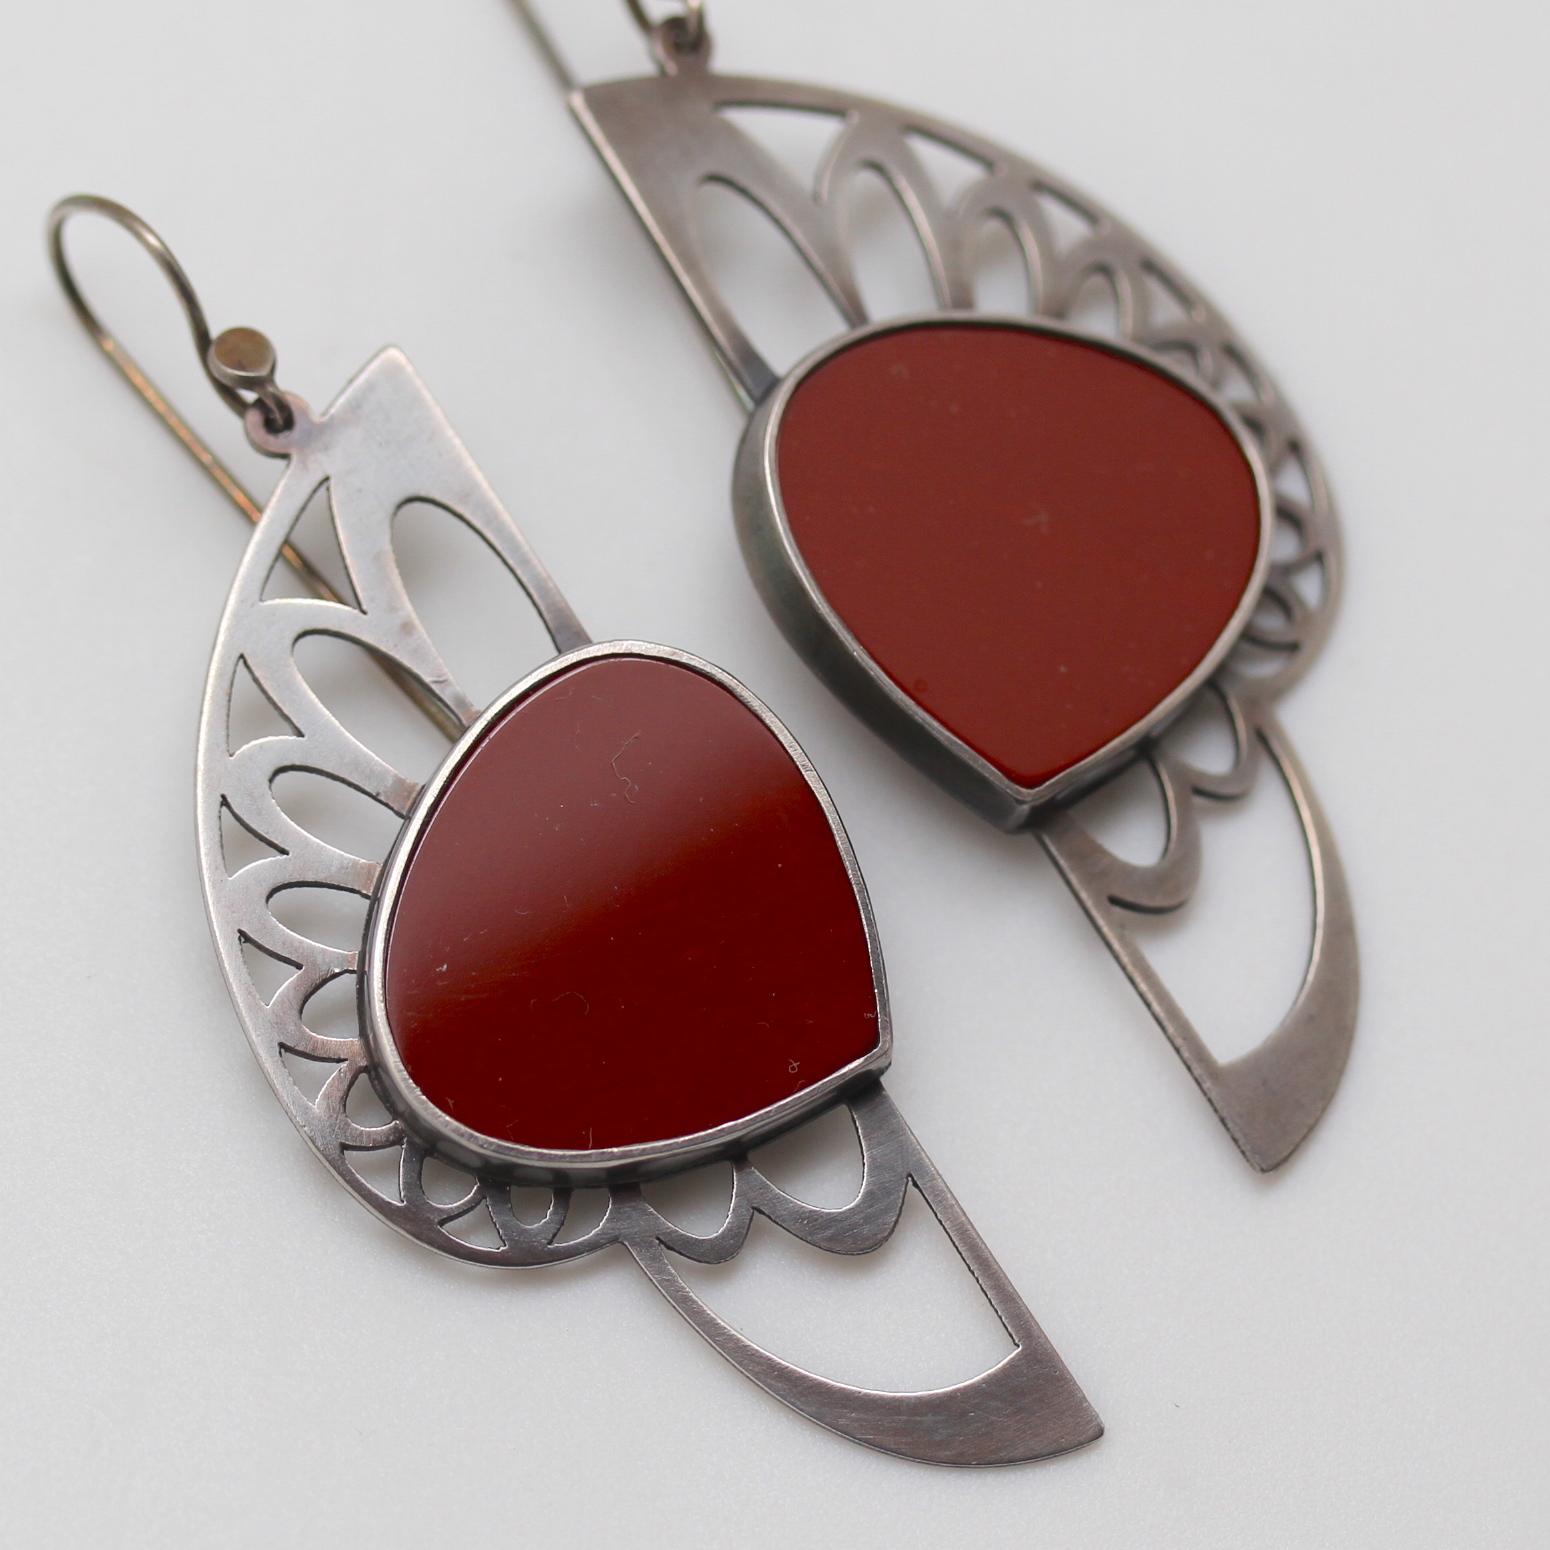 The lyrical movement of a line is captured in these fan like earrings. The Warrior Earrings by Metaalia Jewelry are bold statement earrings, large and in-charge! Laser cut in NYC, the oxidized sterling has a matte finish and the brick red jaspers